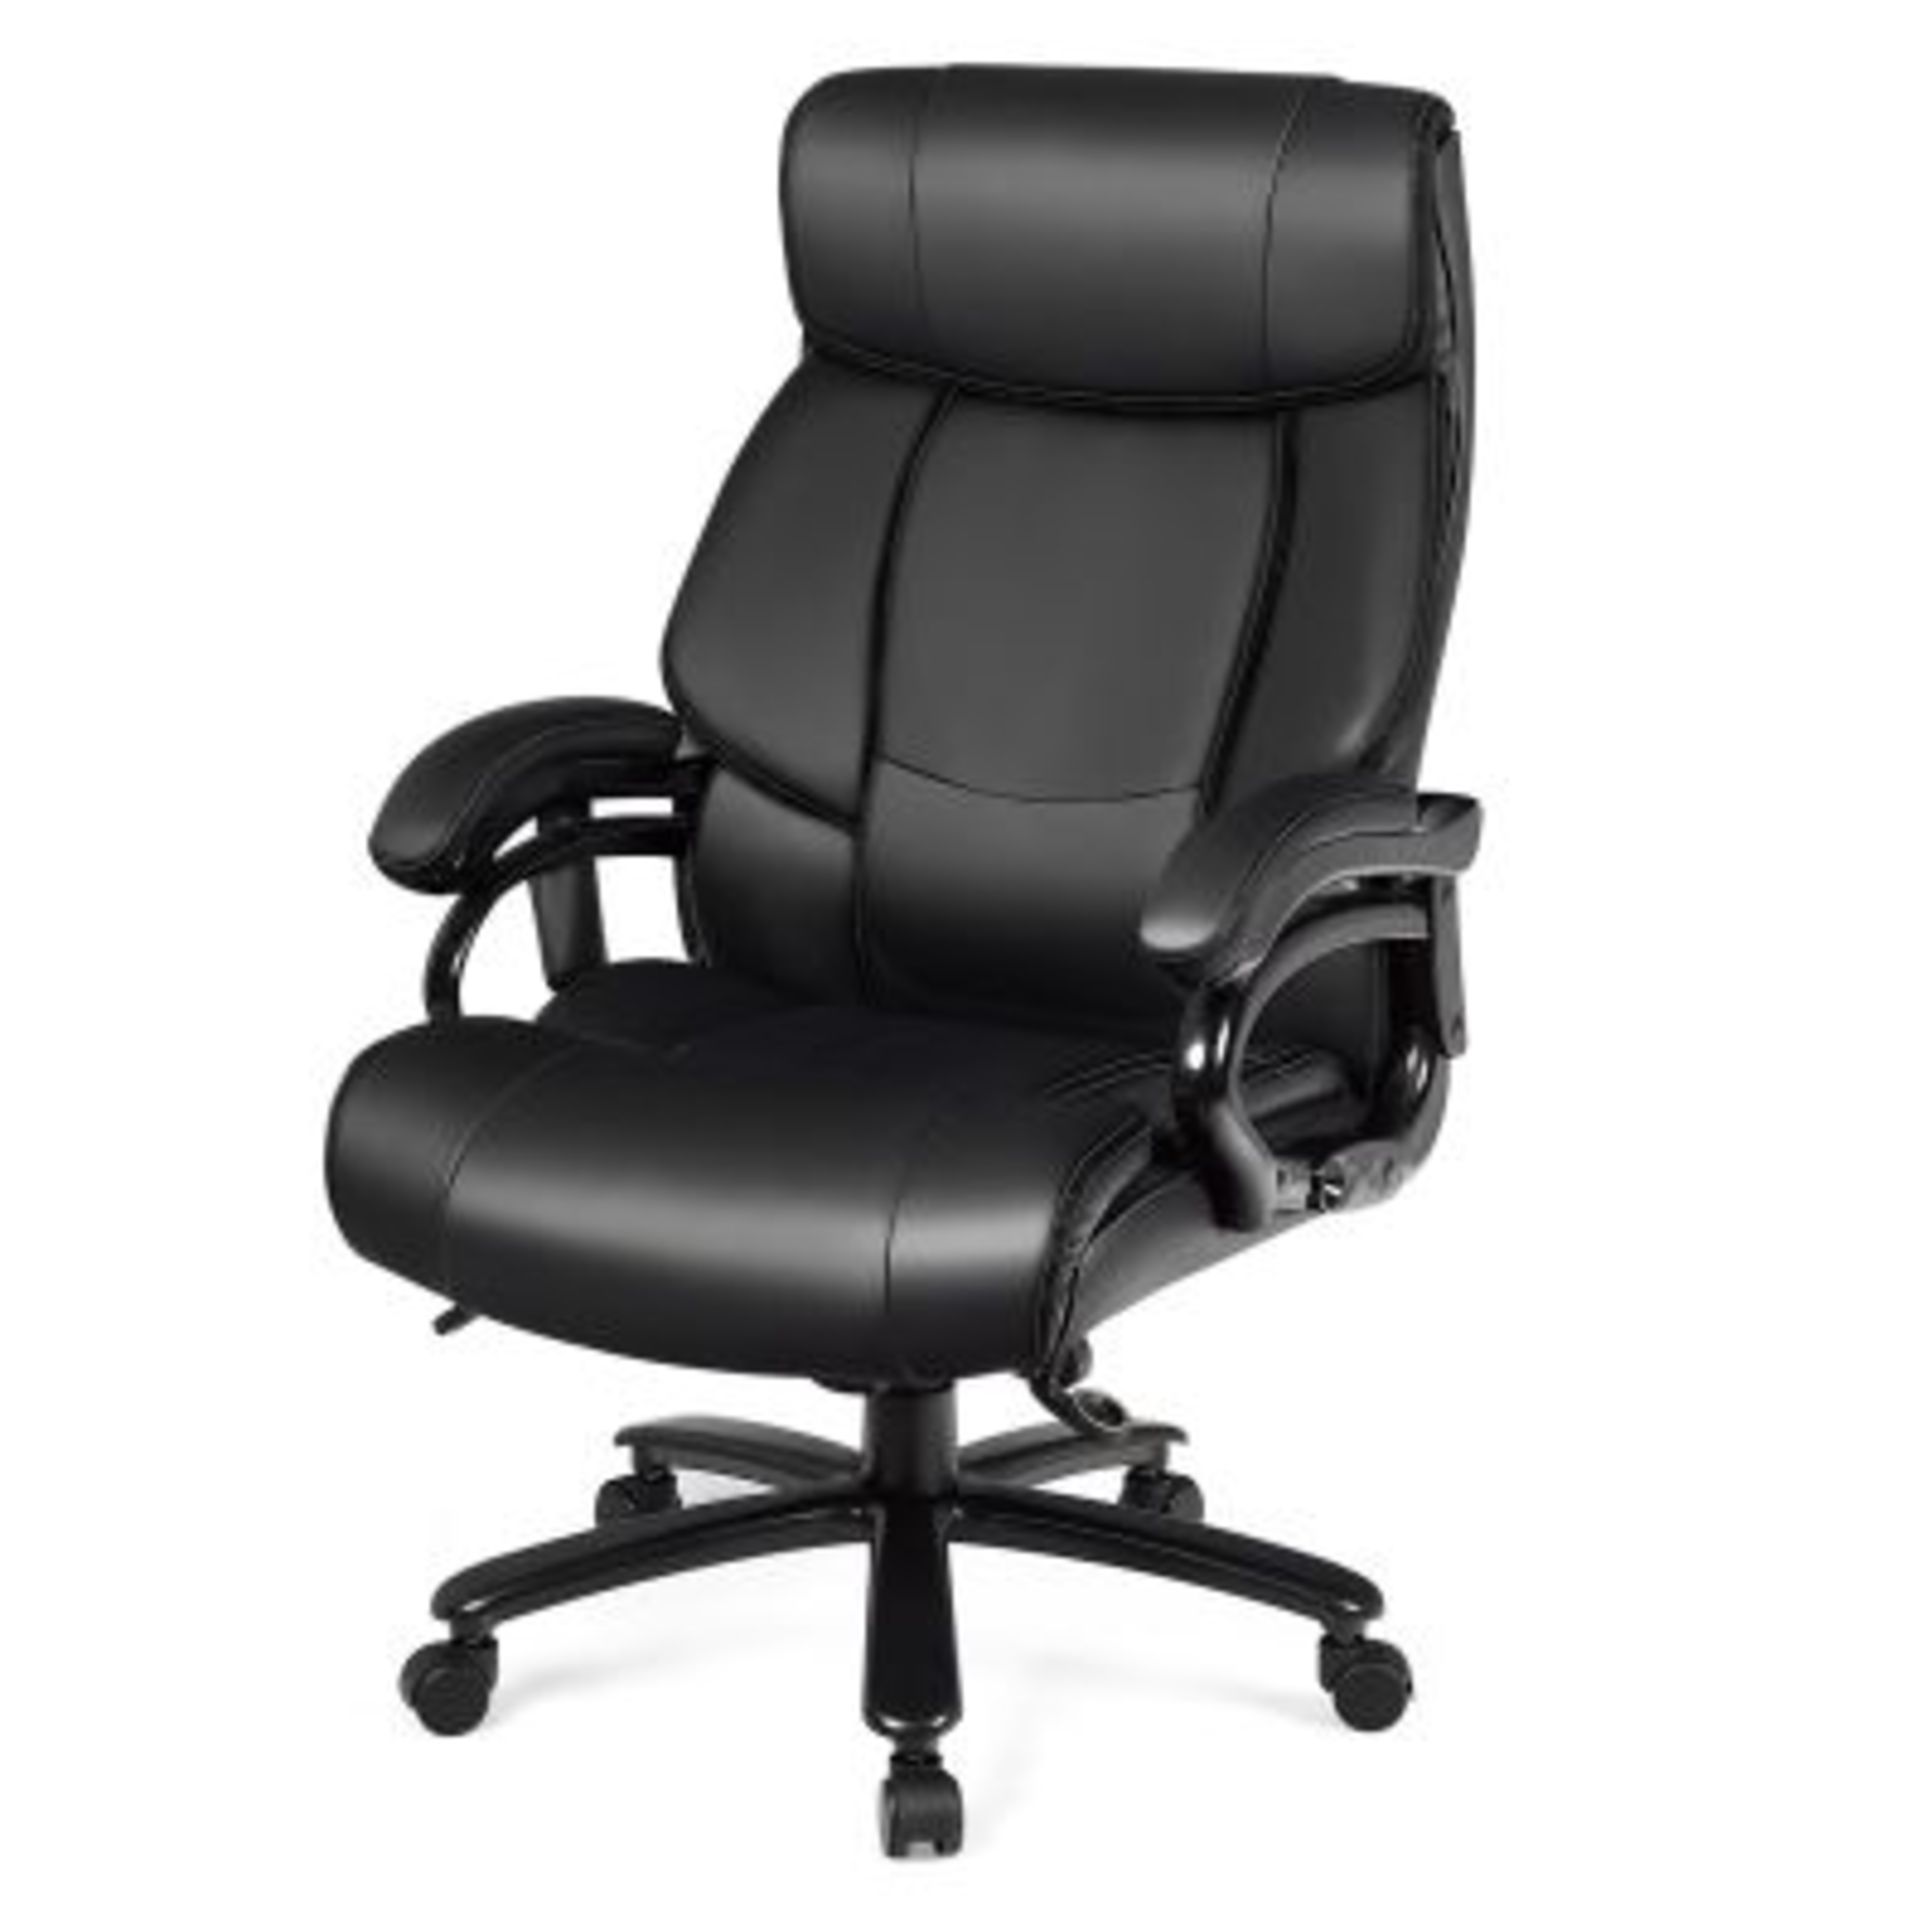 PU Leather Massage Office Chair with Thick Foam Cushion Black - ER54